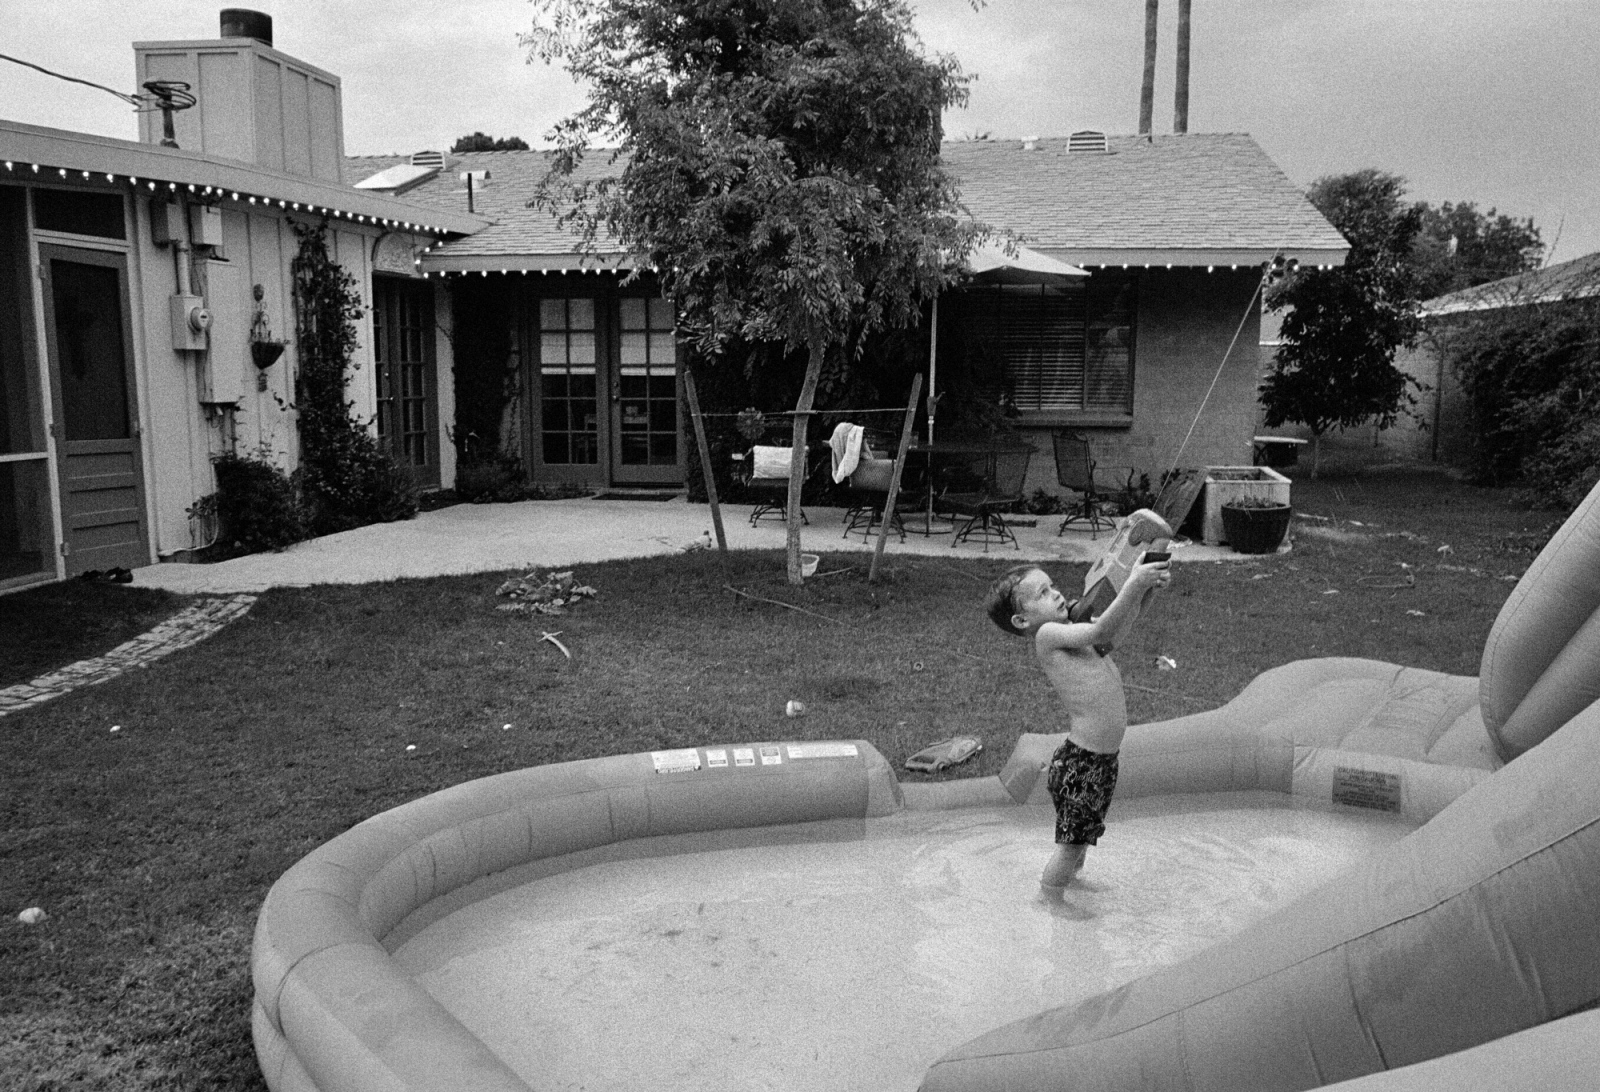 Death of The Colorado - A child plays alone in his suburban backyard near...